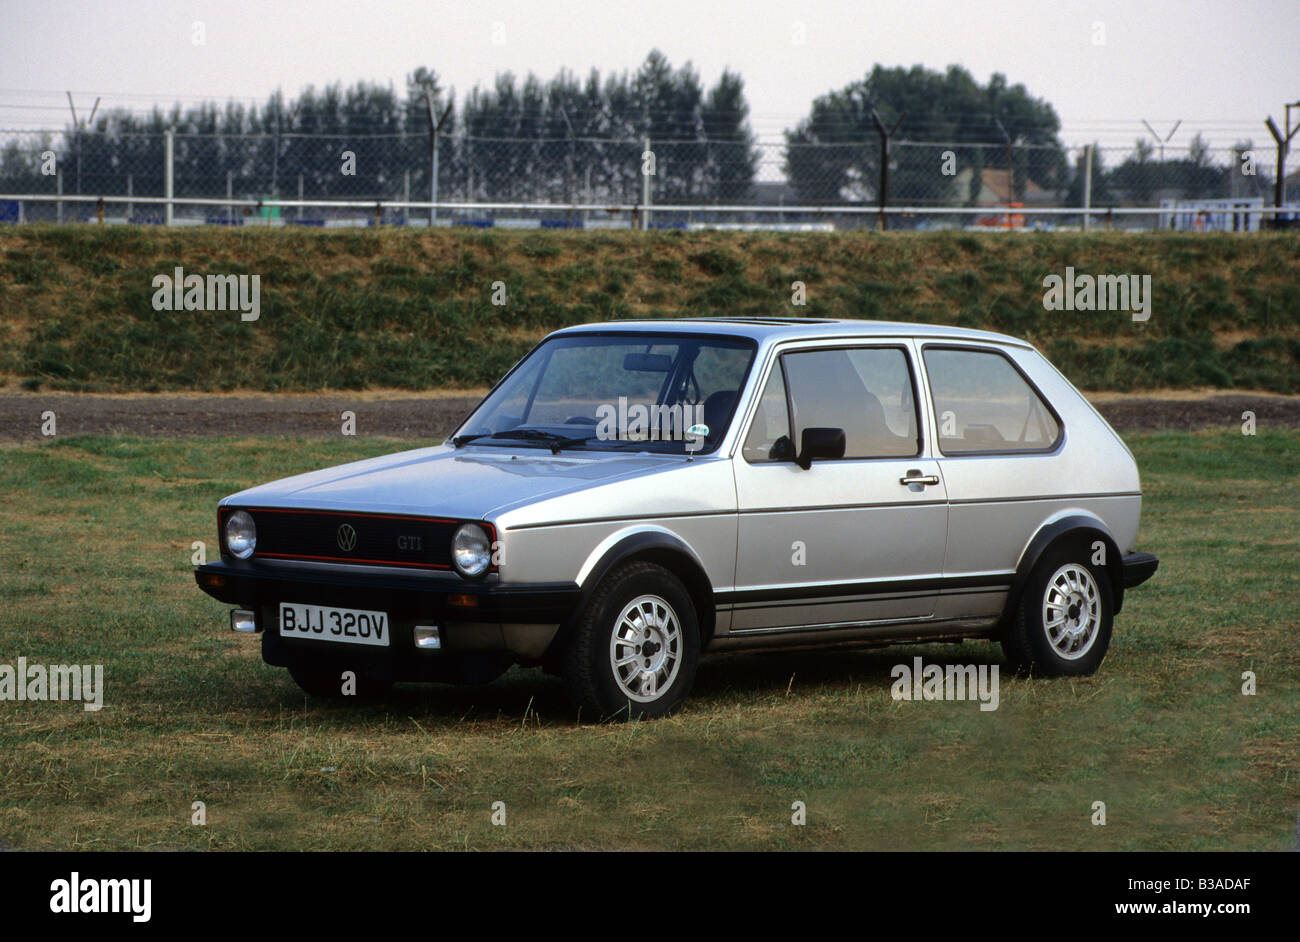 Mk1 Golf High Resolution Stock Photography and Images - Alamy